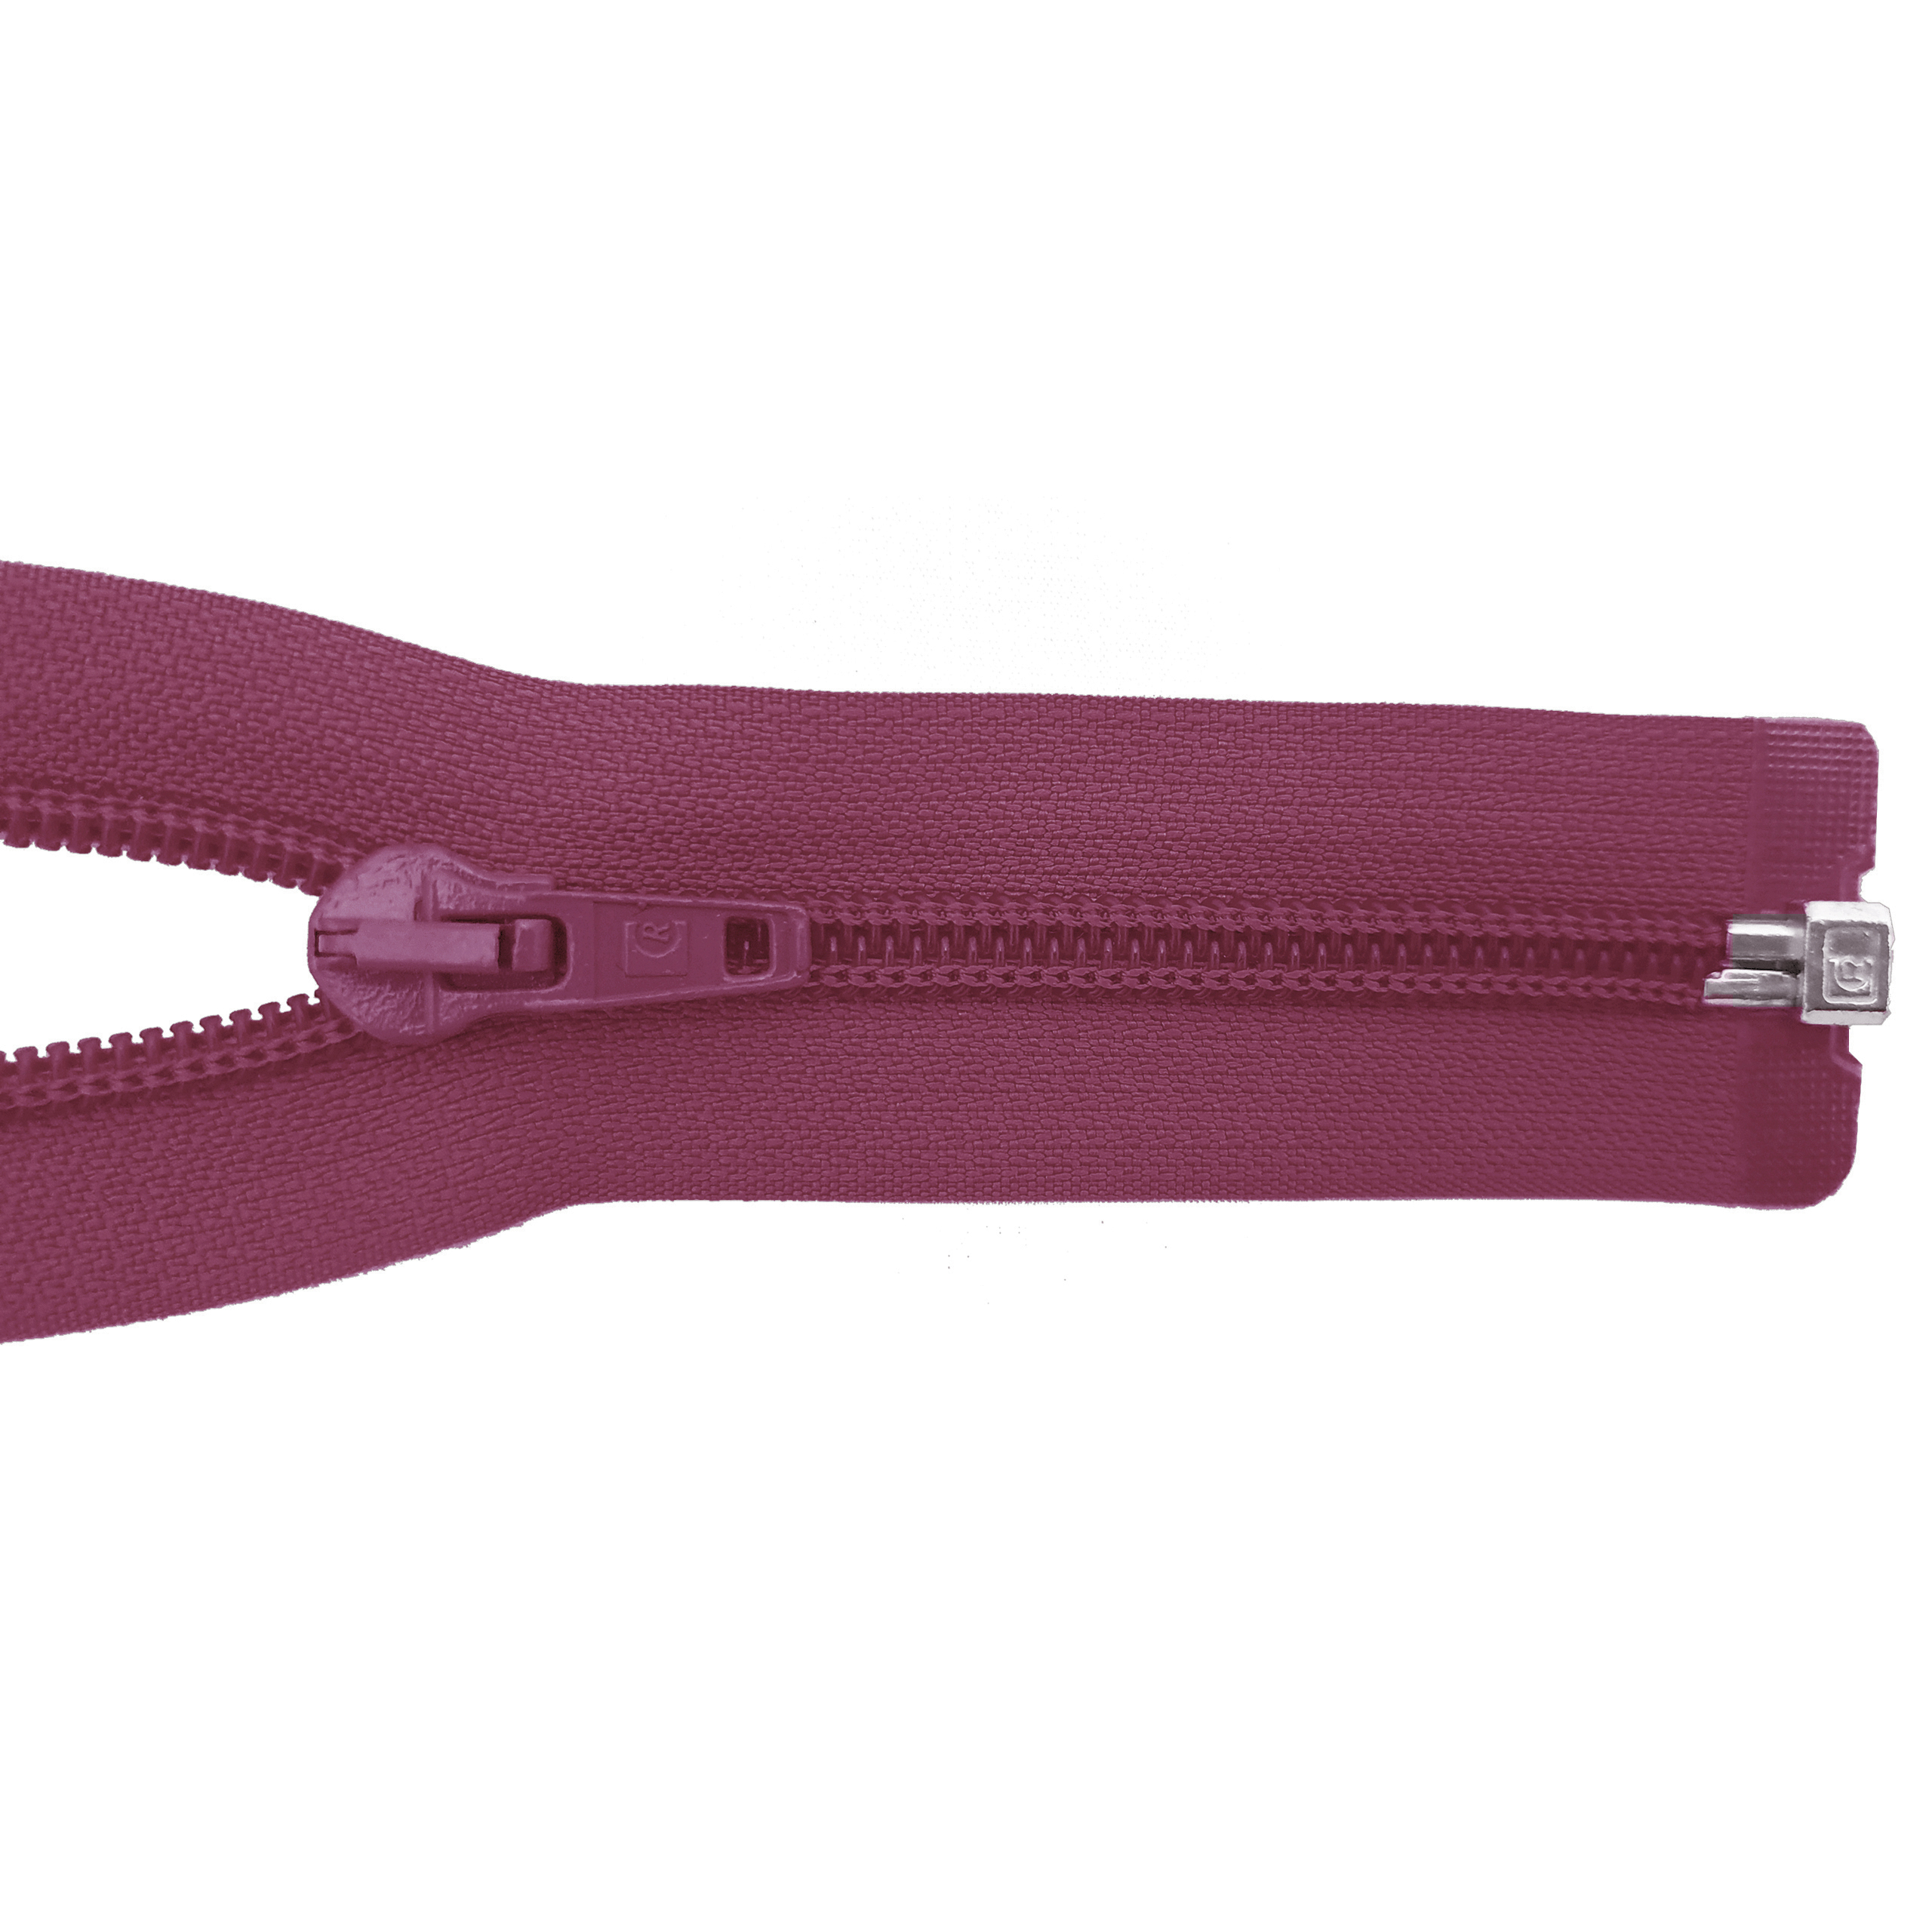 zipper 80cm,divisible, PES spiral, wide, berry